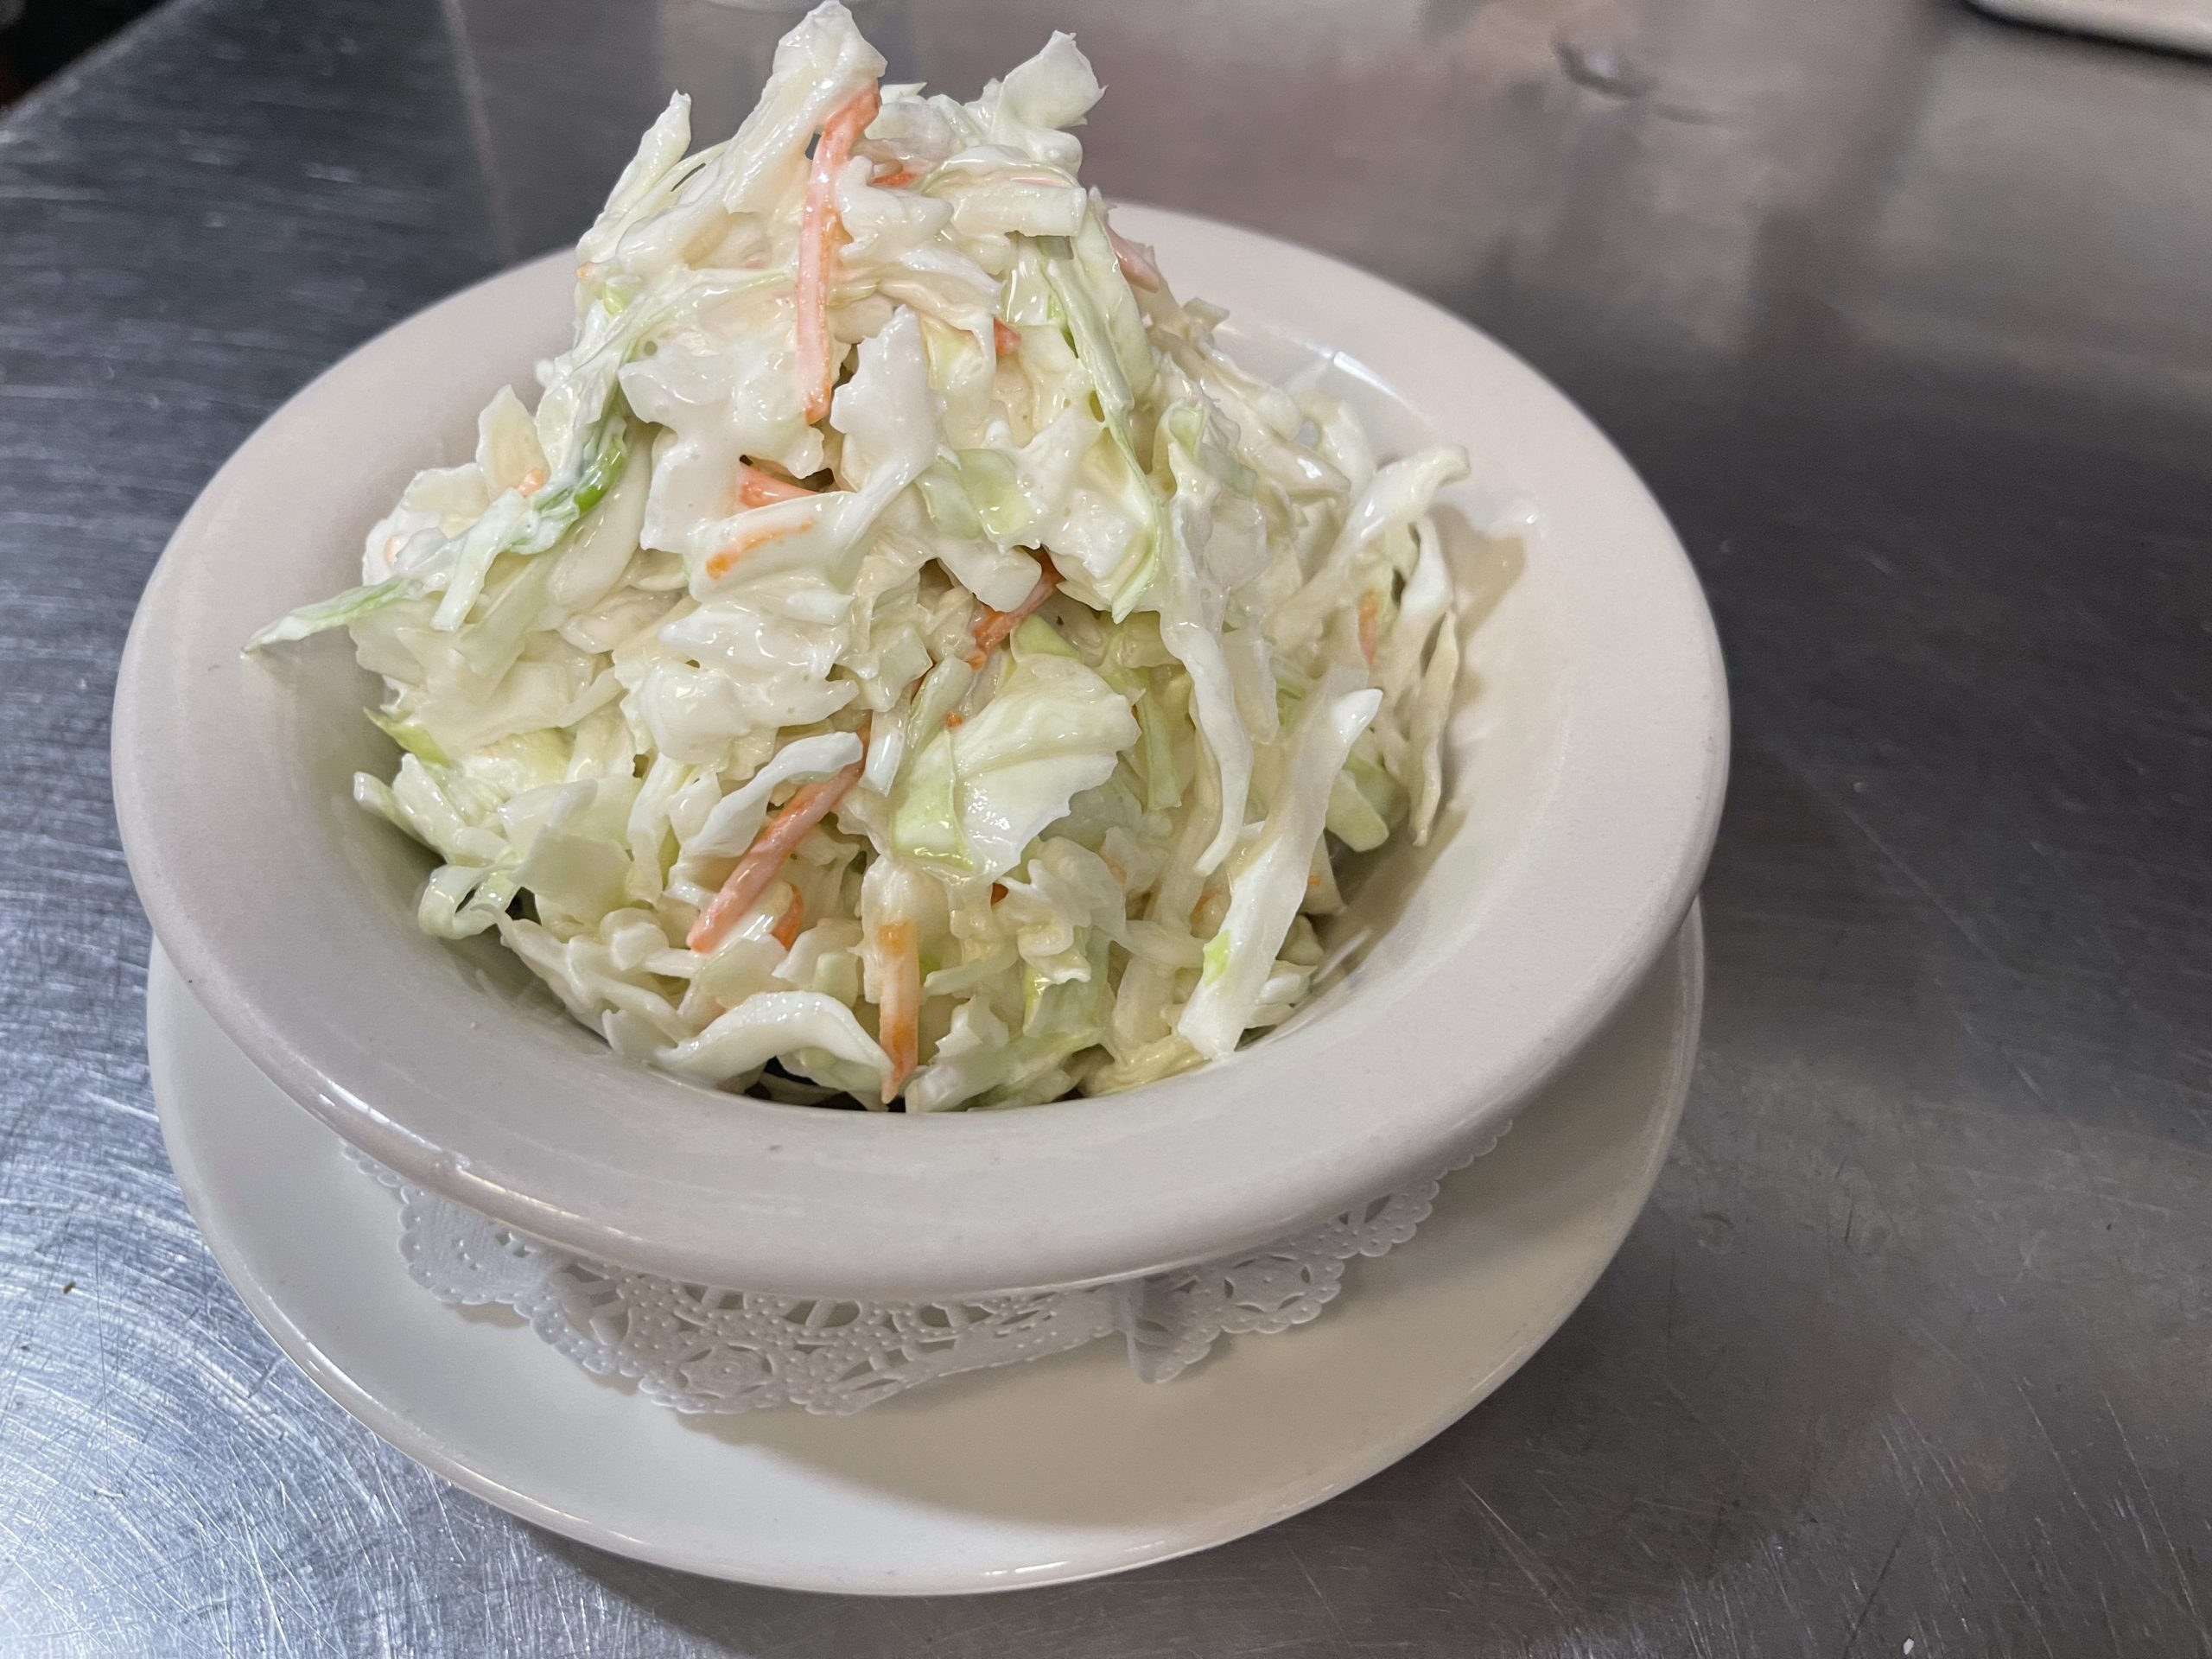 A bowl of coleslaw sitting on top of a plate.